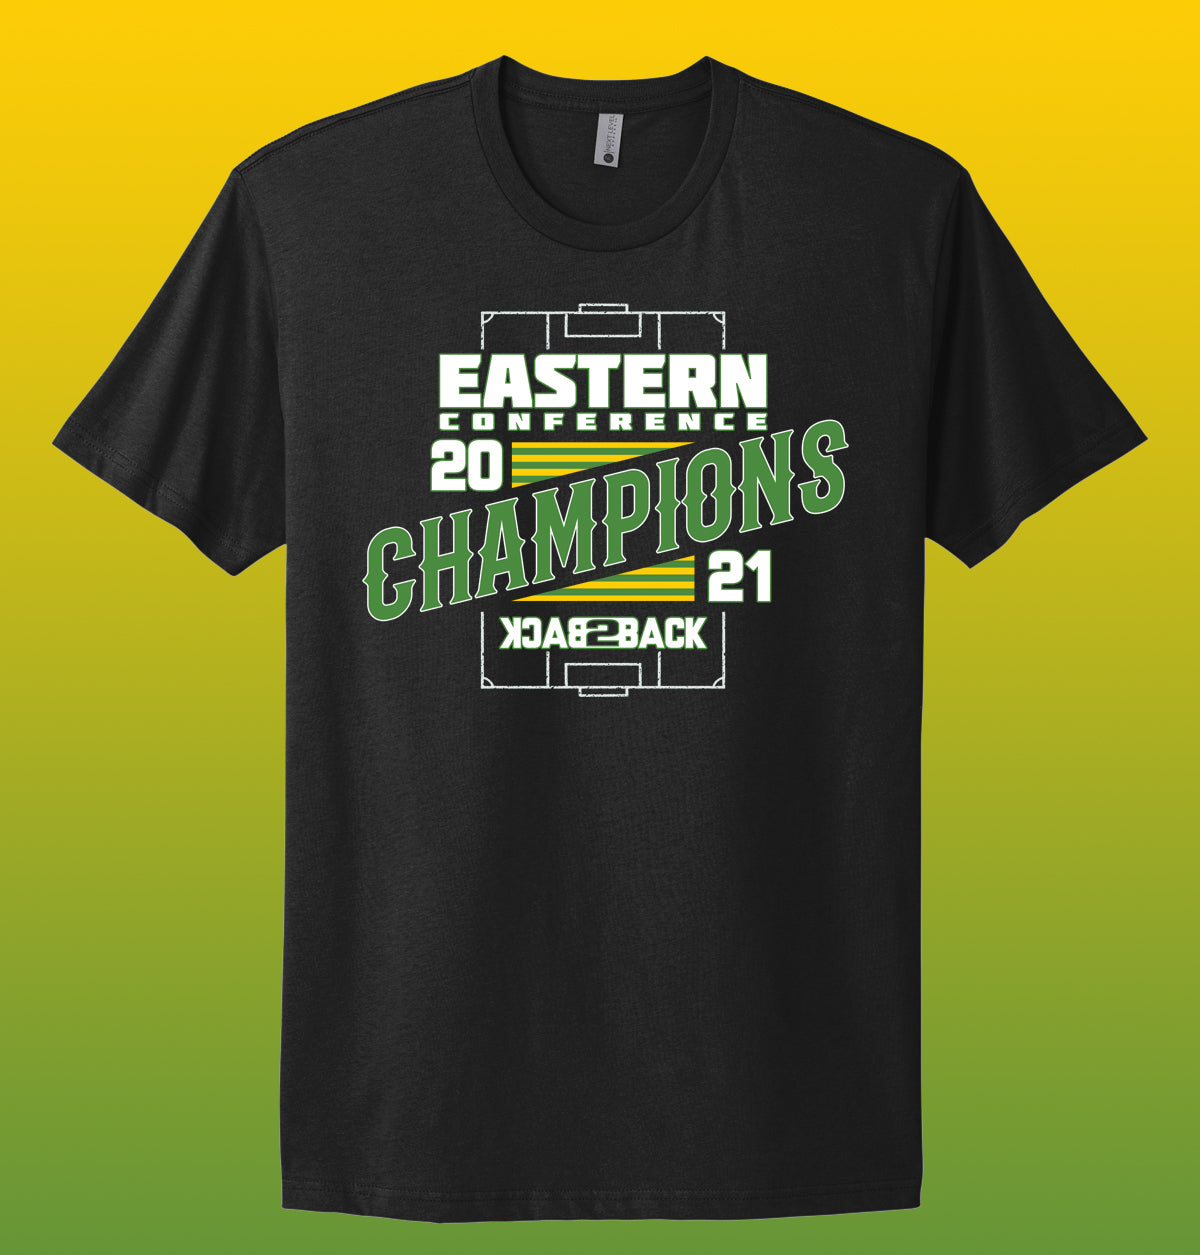 Eastern Conference champions black shirt featuring the Rowdies soccer team in St. pete St. Petersburg - locally made t shirts